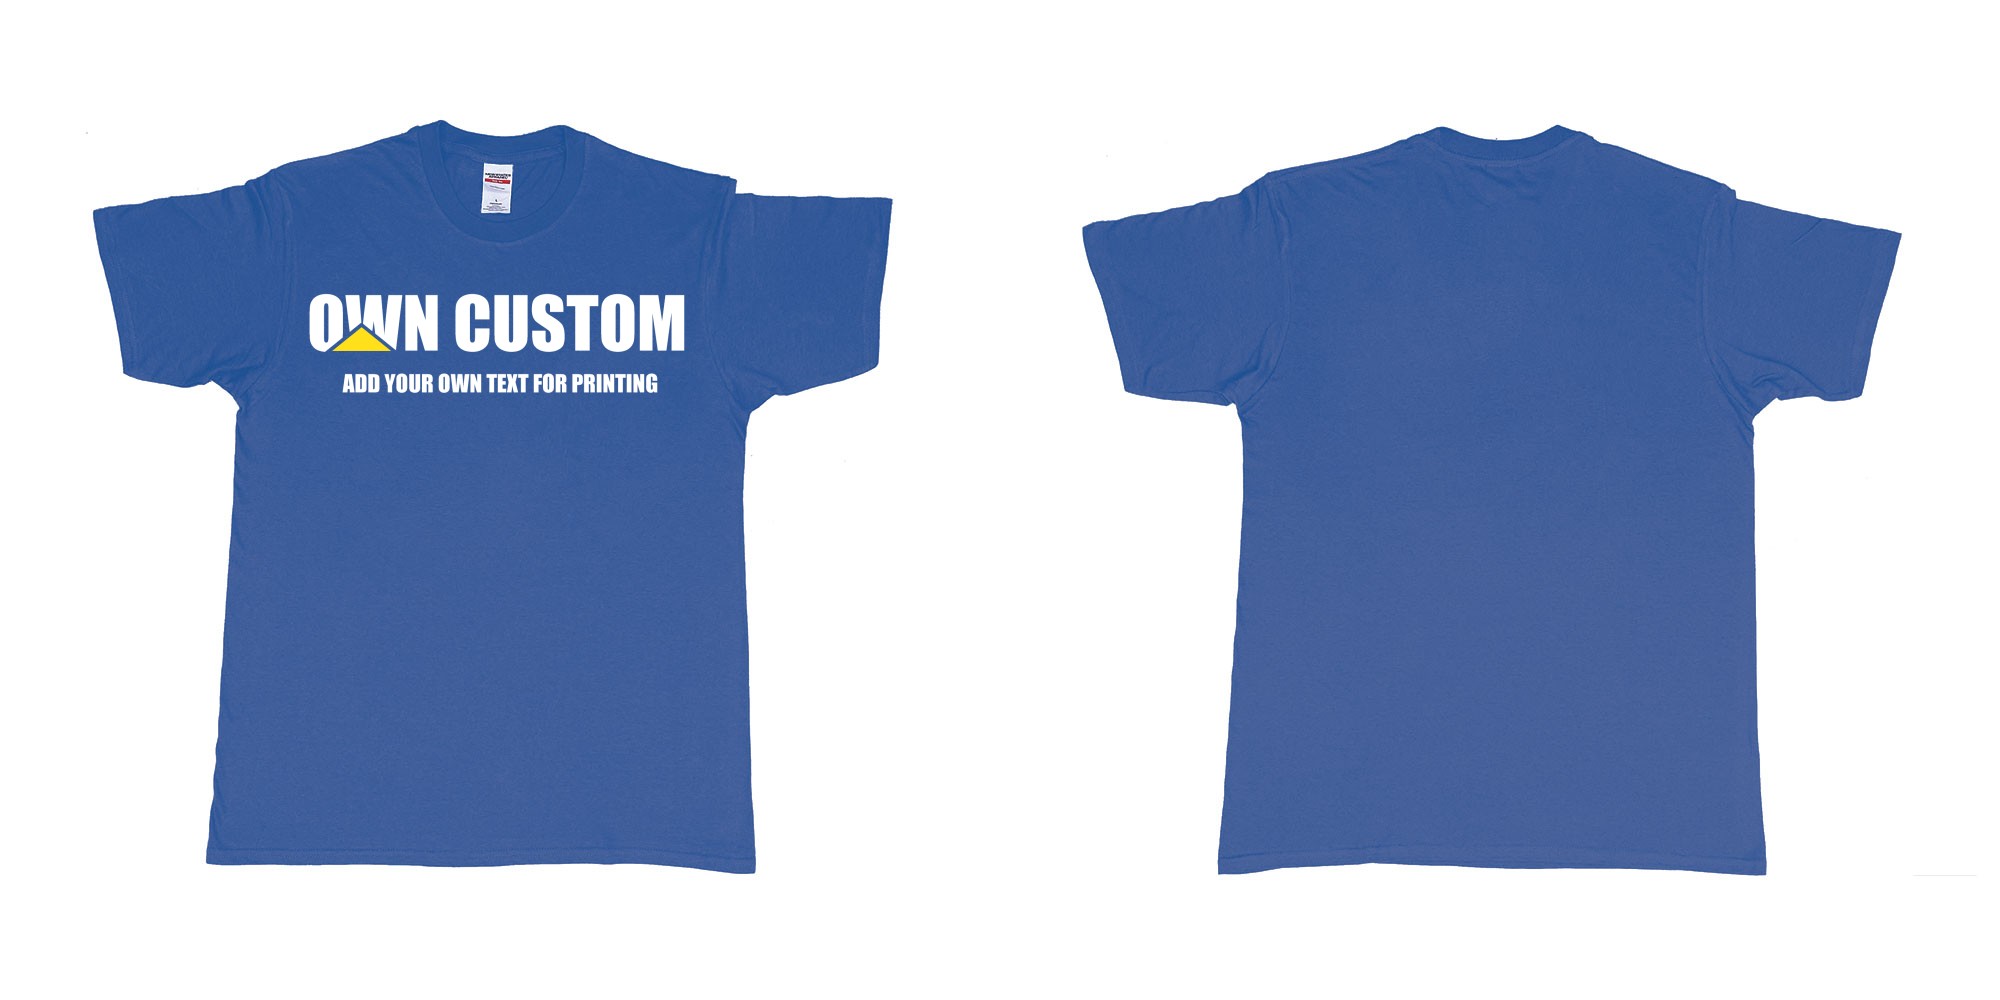 Custom tshirt design caterpillar inc logo custom text printing shirt in fabric color royal-blue choice your own text made in Bali by The Pirate Way